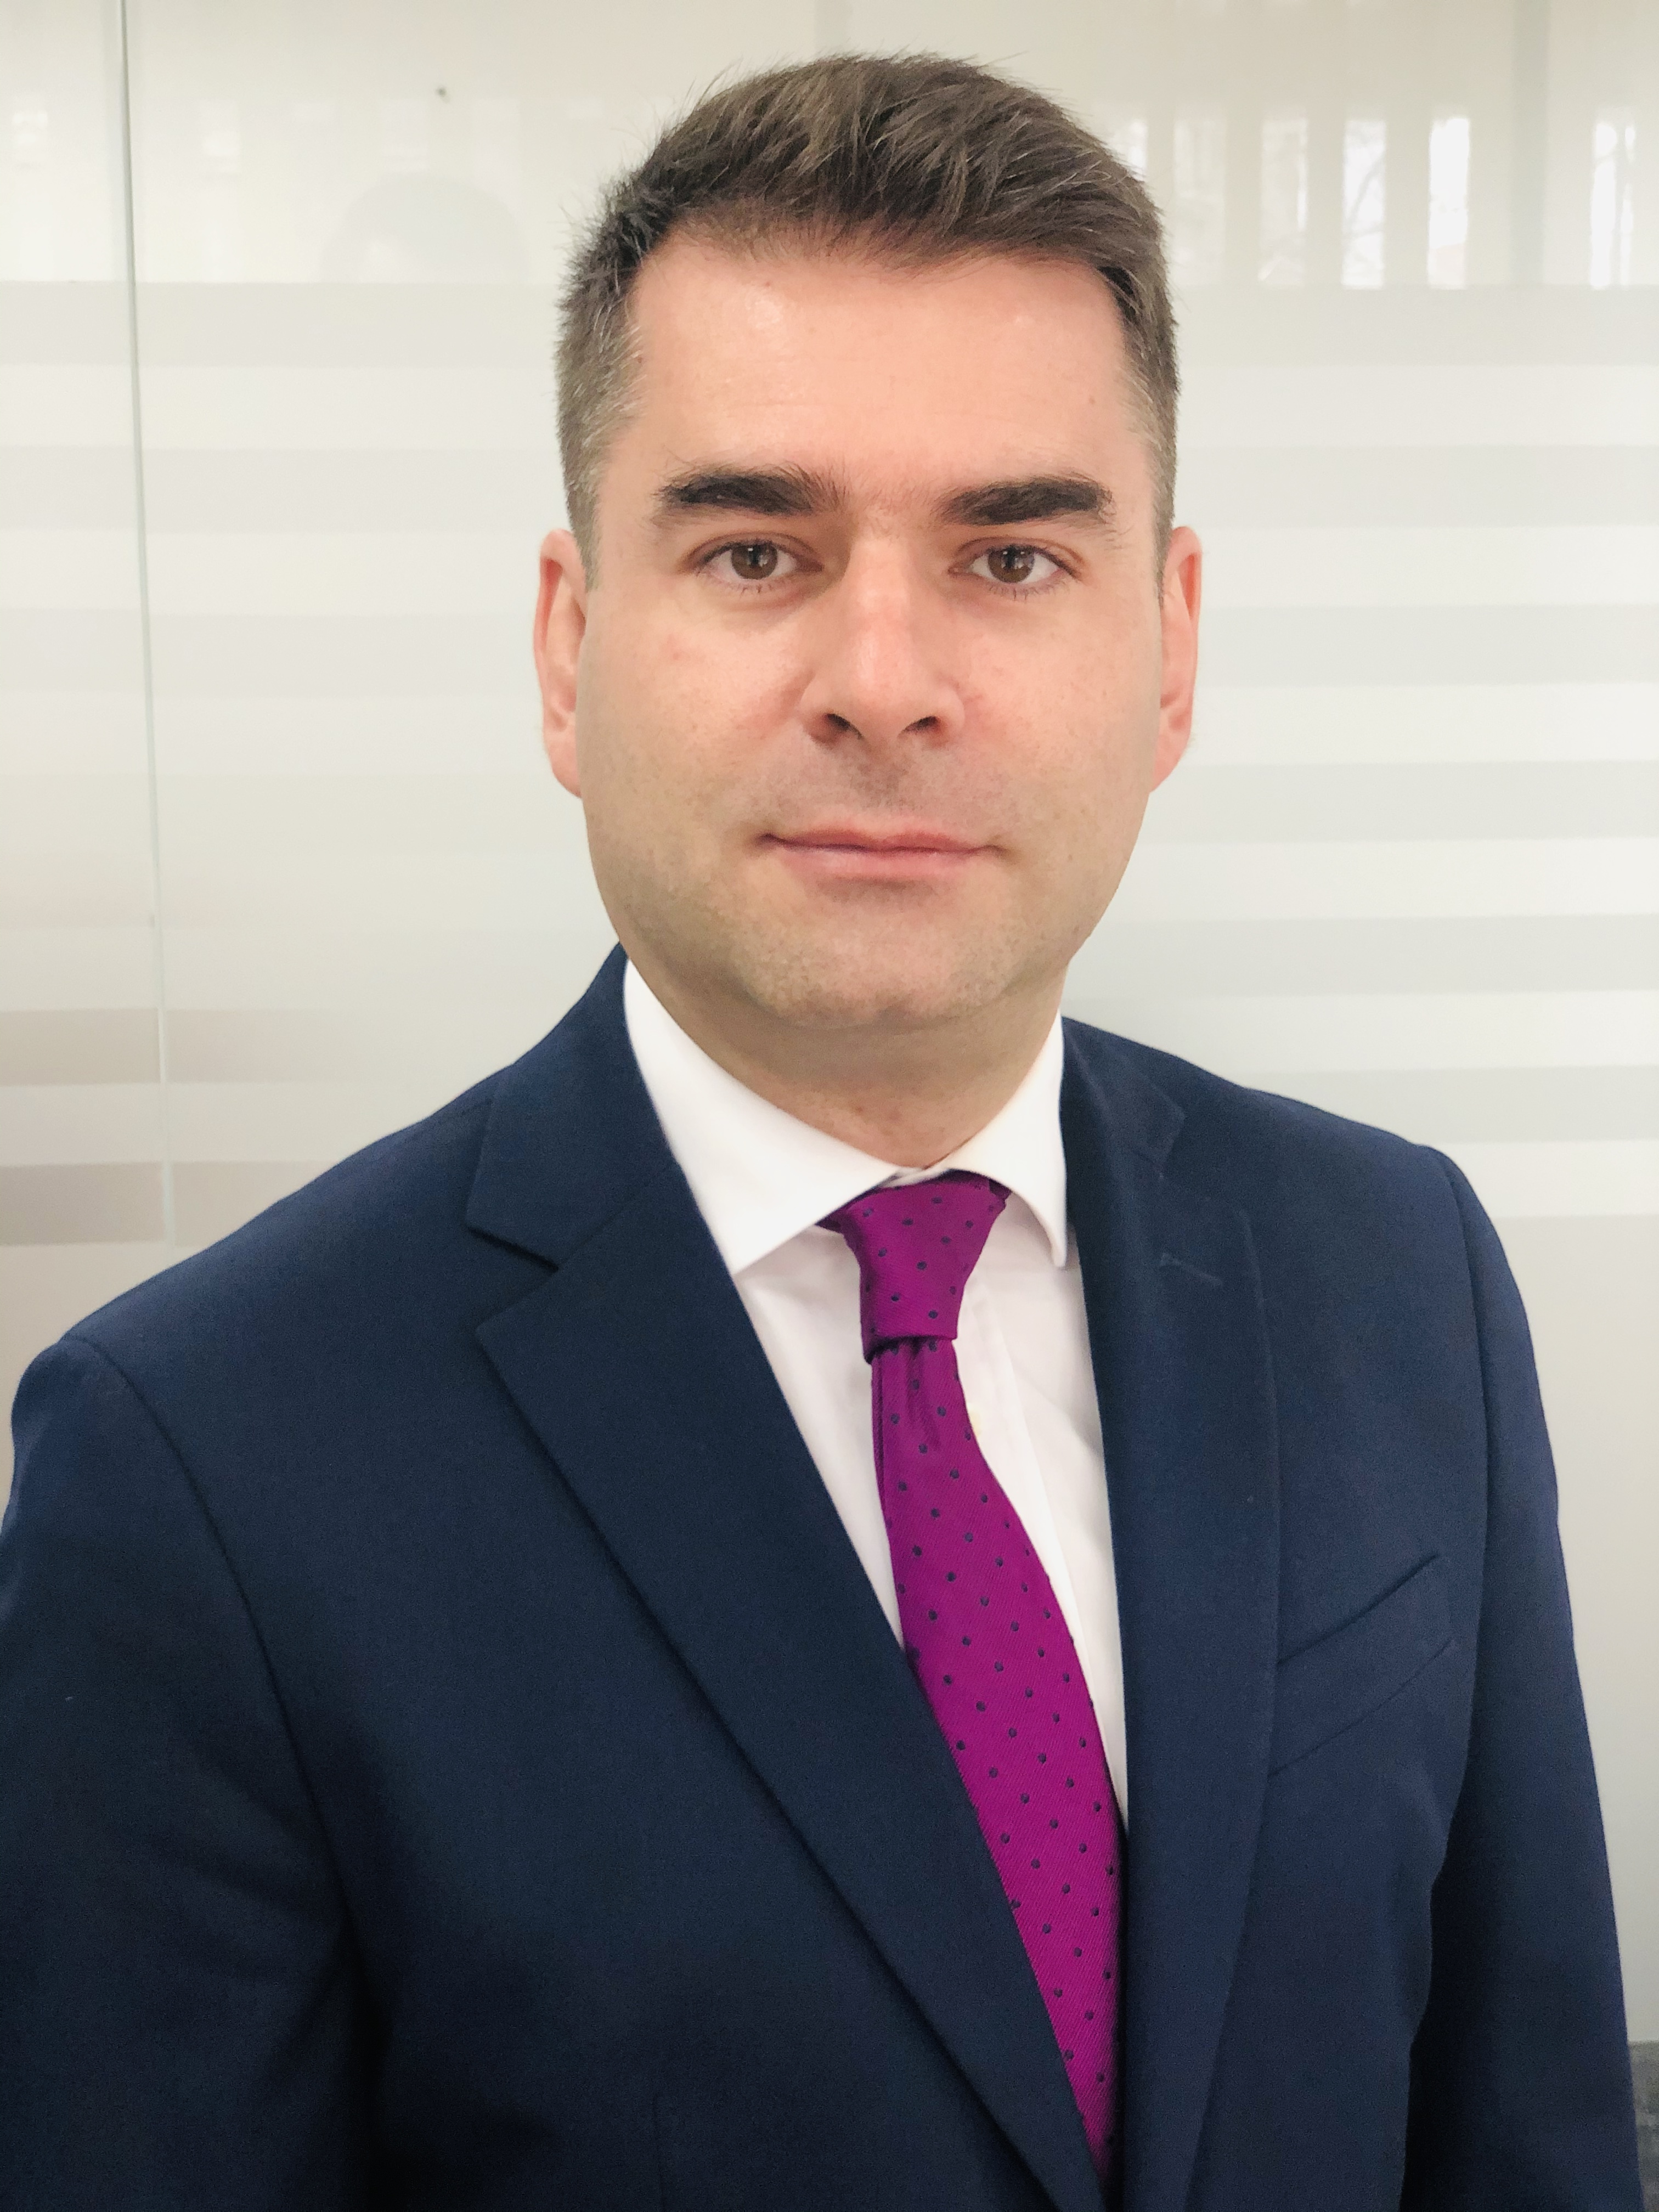 Alexandru Popescu is the new Commercial Director of ALD Automotive România